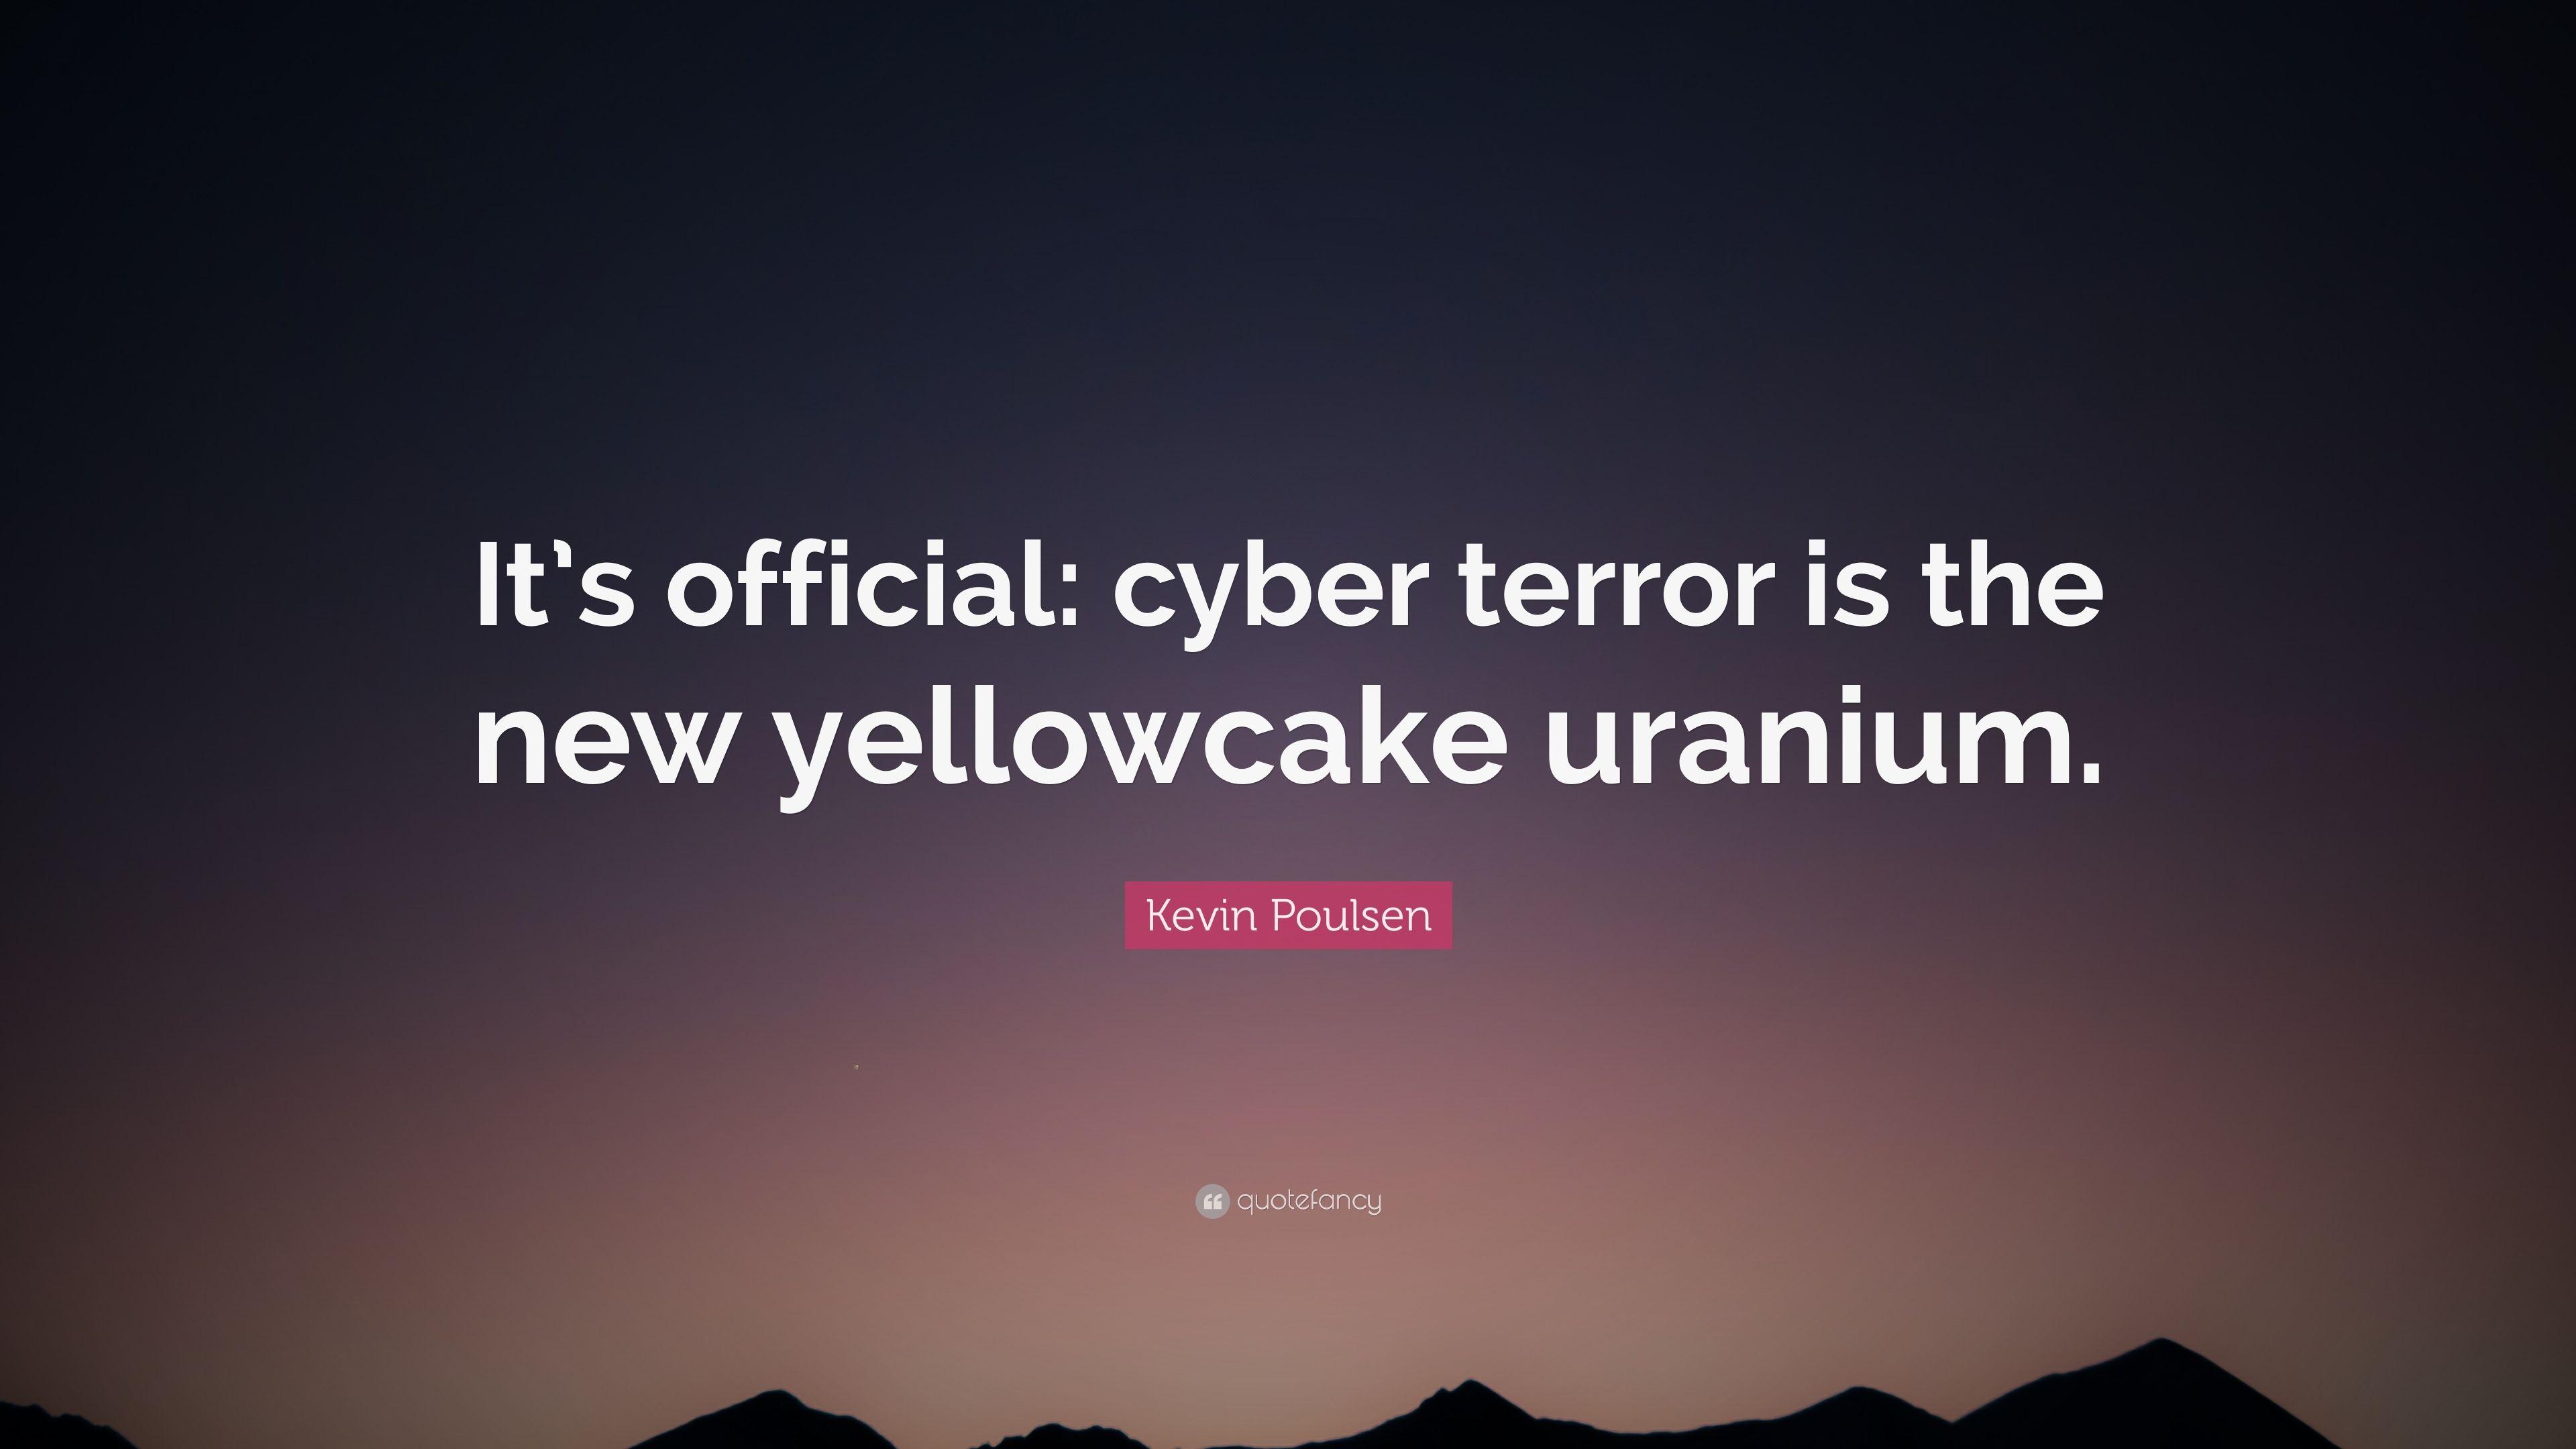 Kevin Poulsen Quote: “It's official: cyber terror is the new